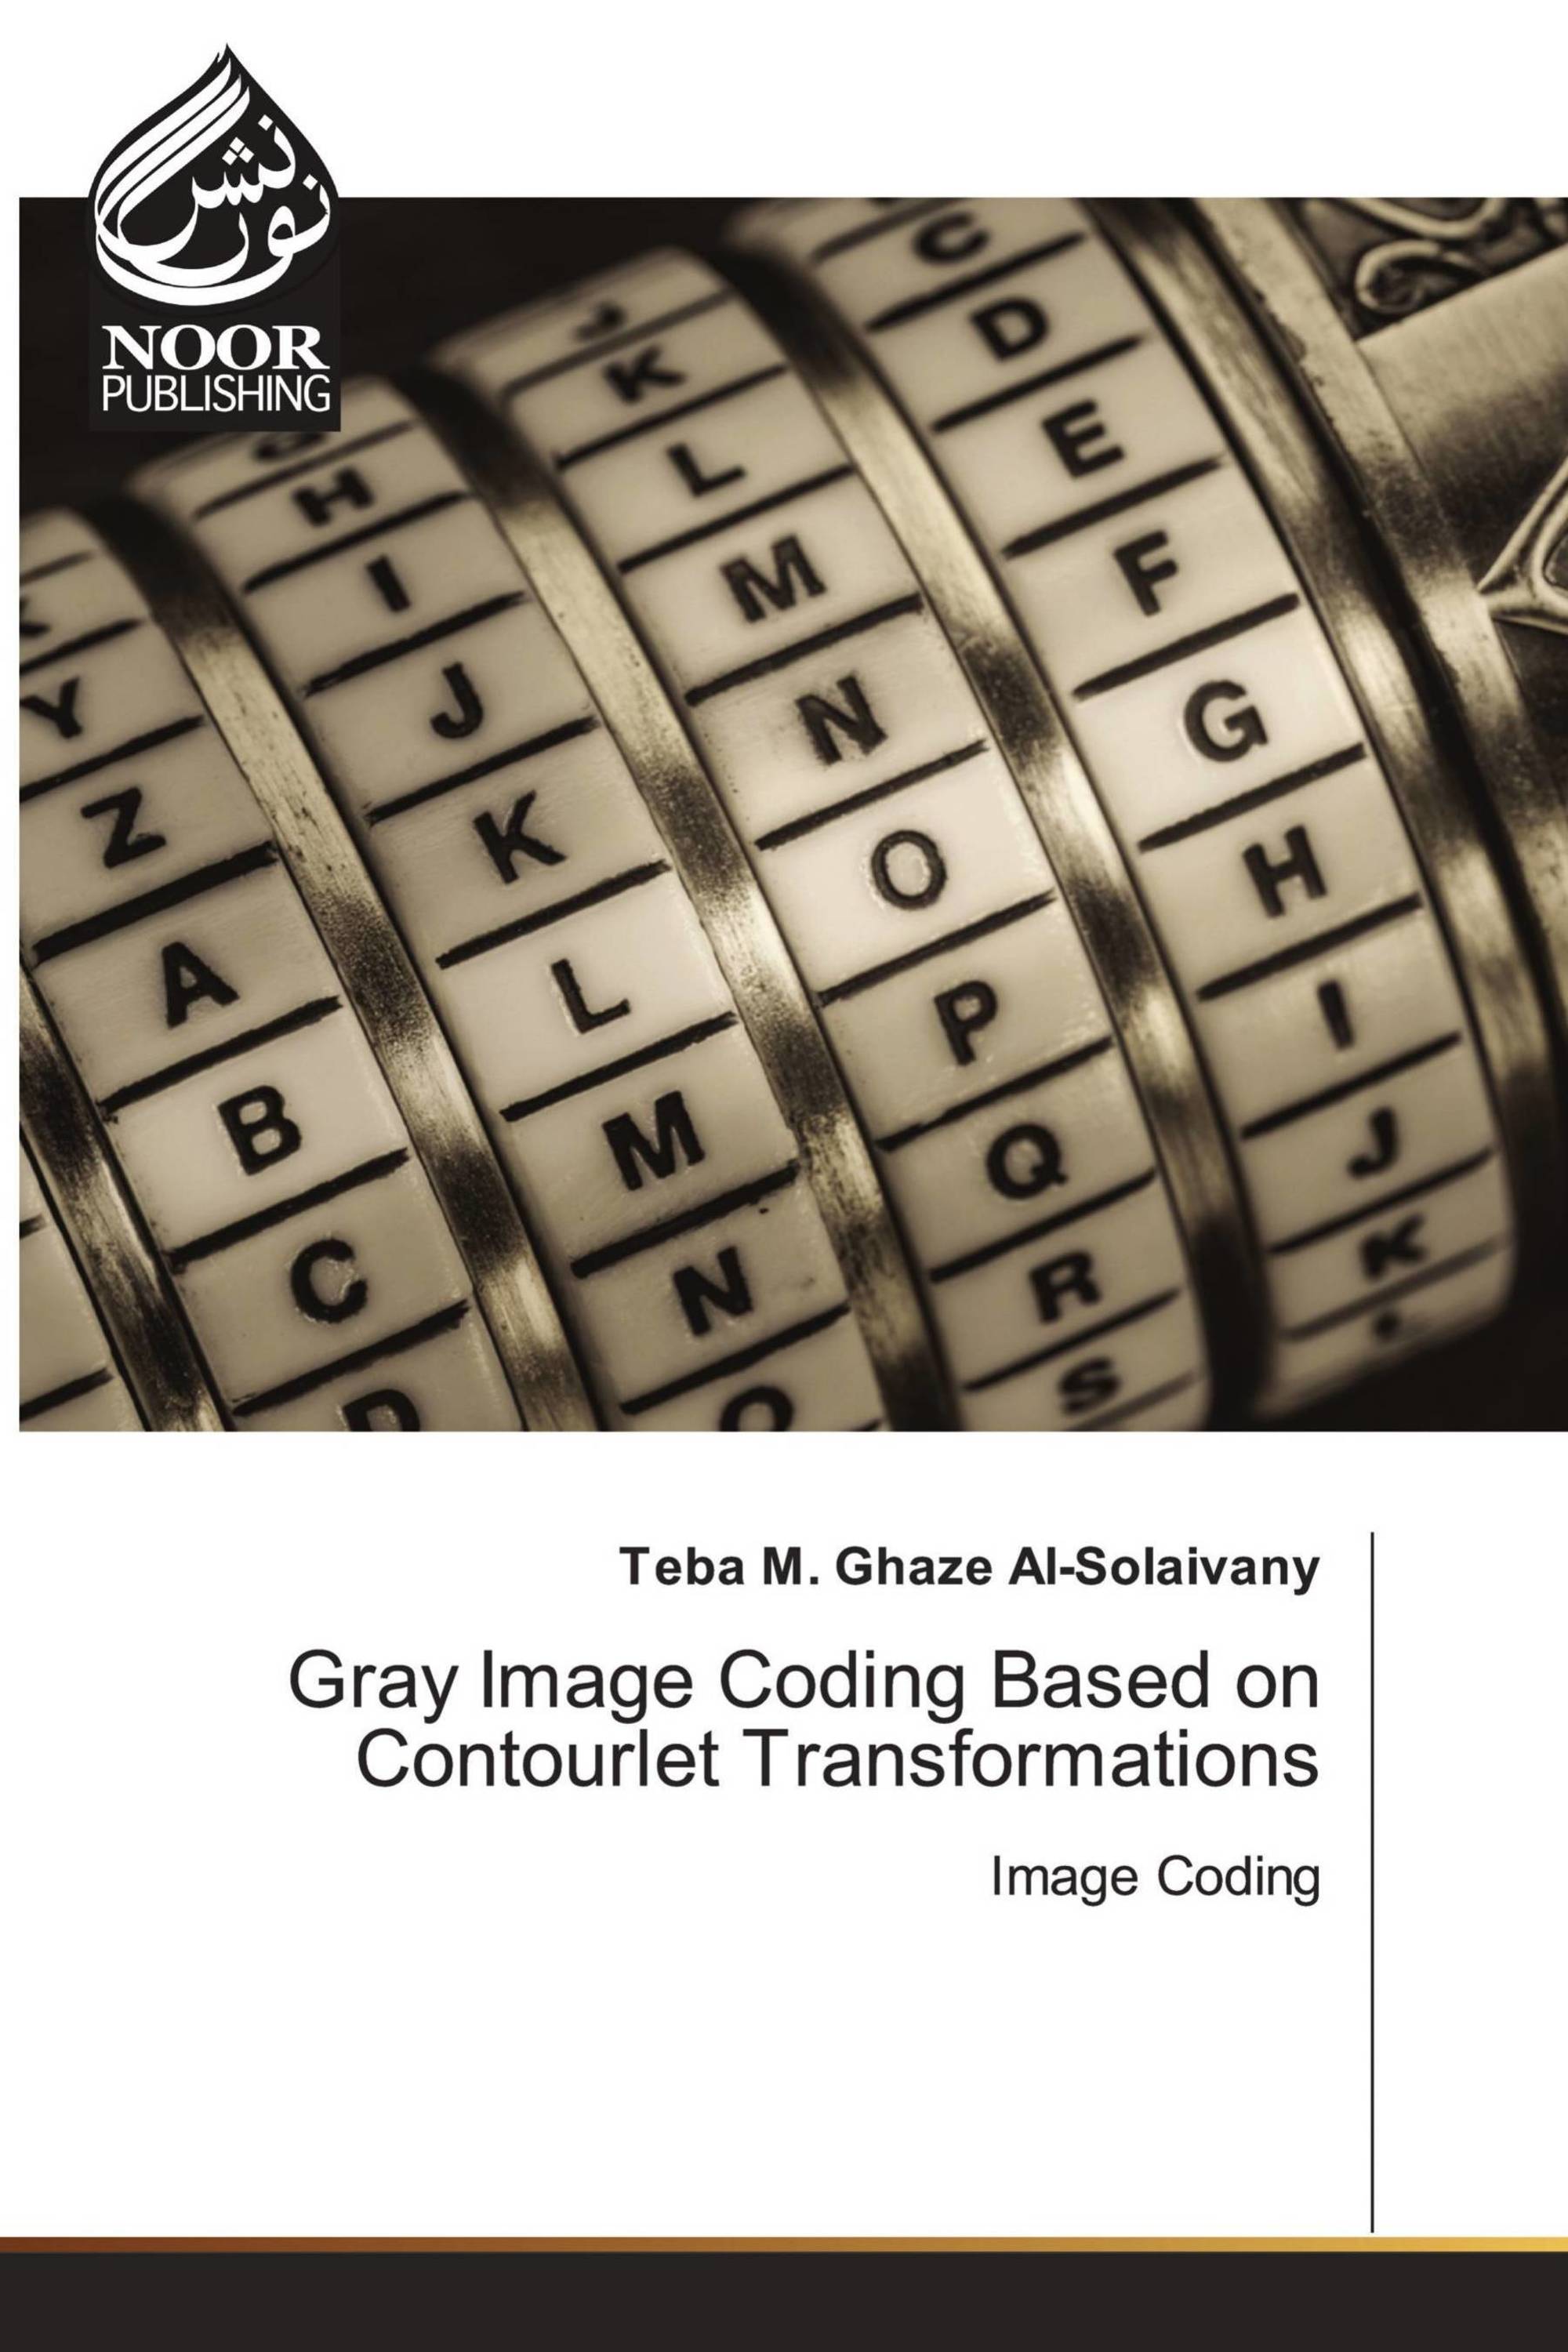 Gray Image Coding Based on Contourlet Transformations